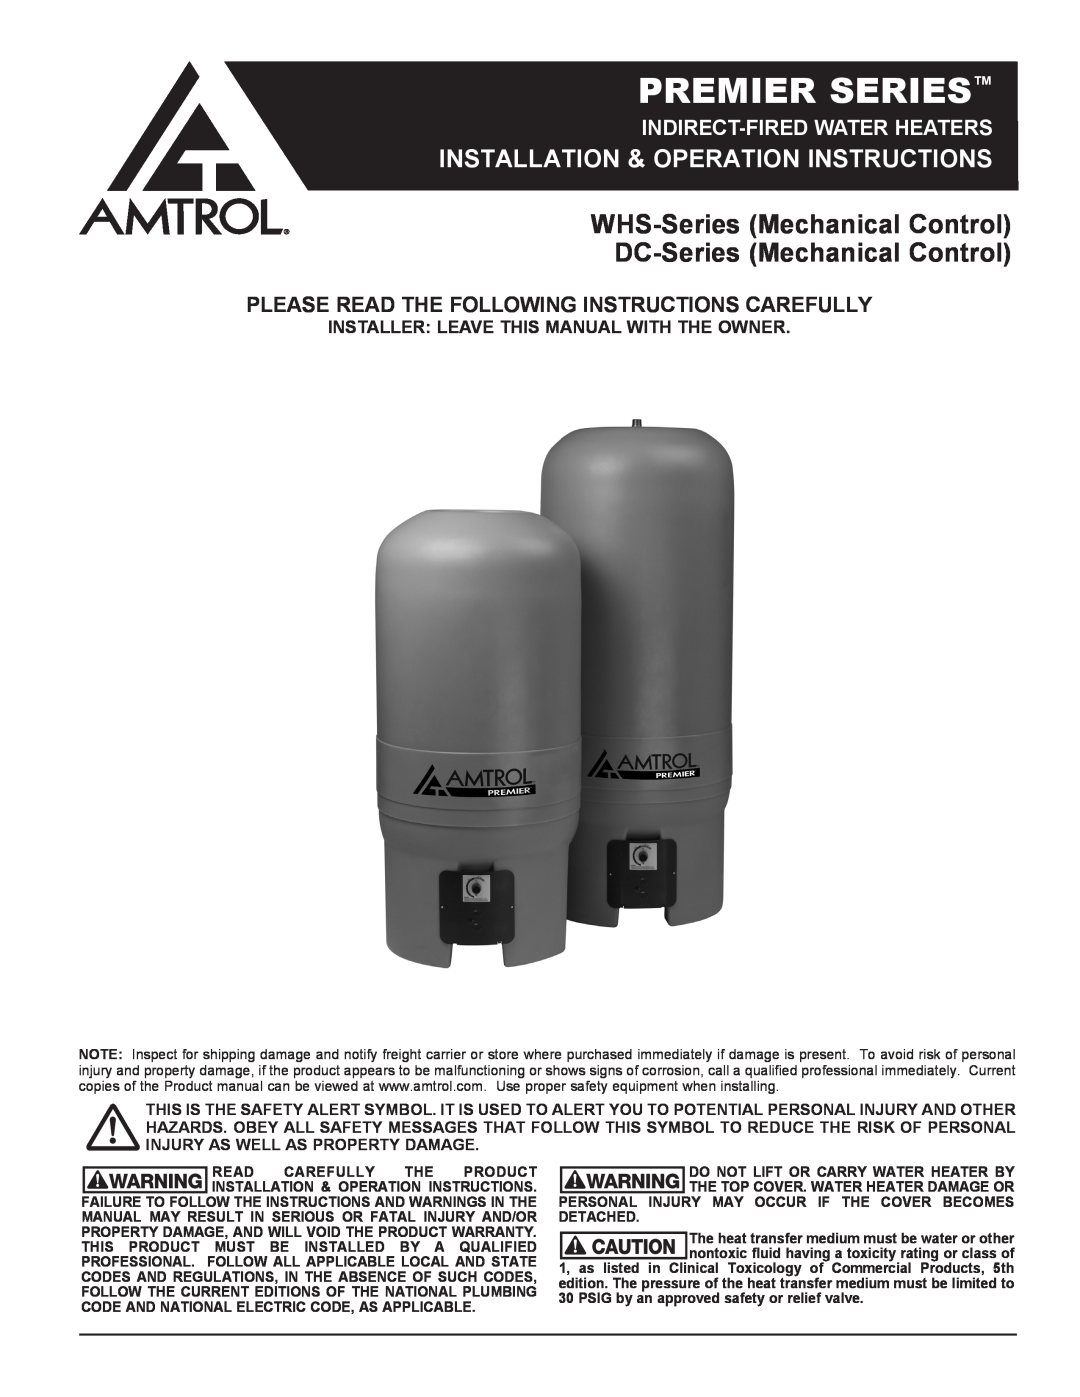 Amtrol whs-series warranty Please Read The Following Instructions Carefully, Installer Leave This Manual With The Owner 